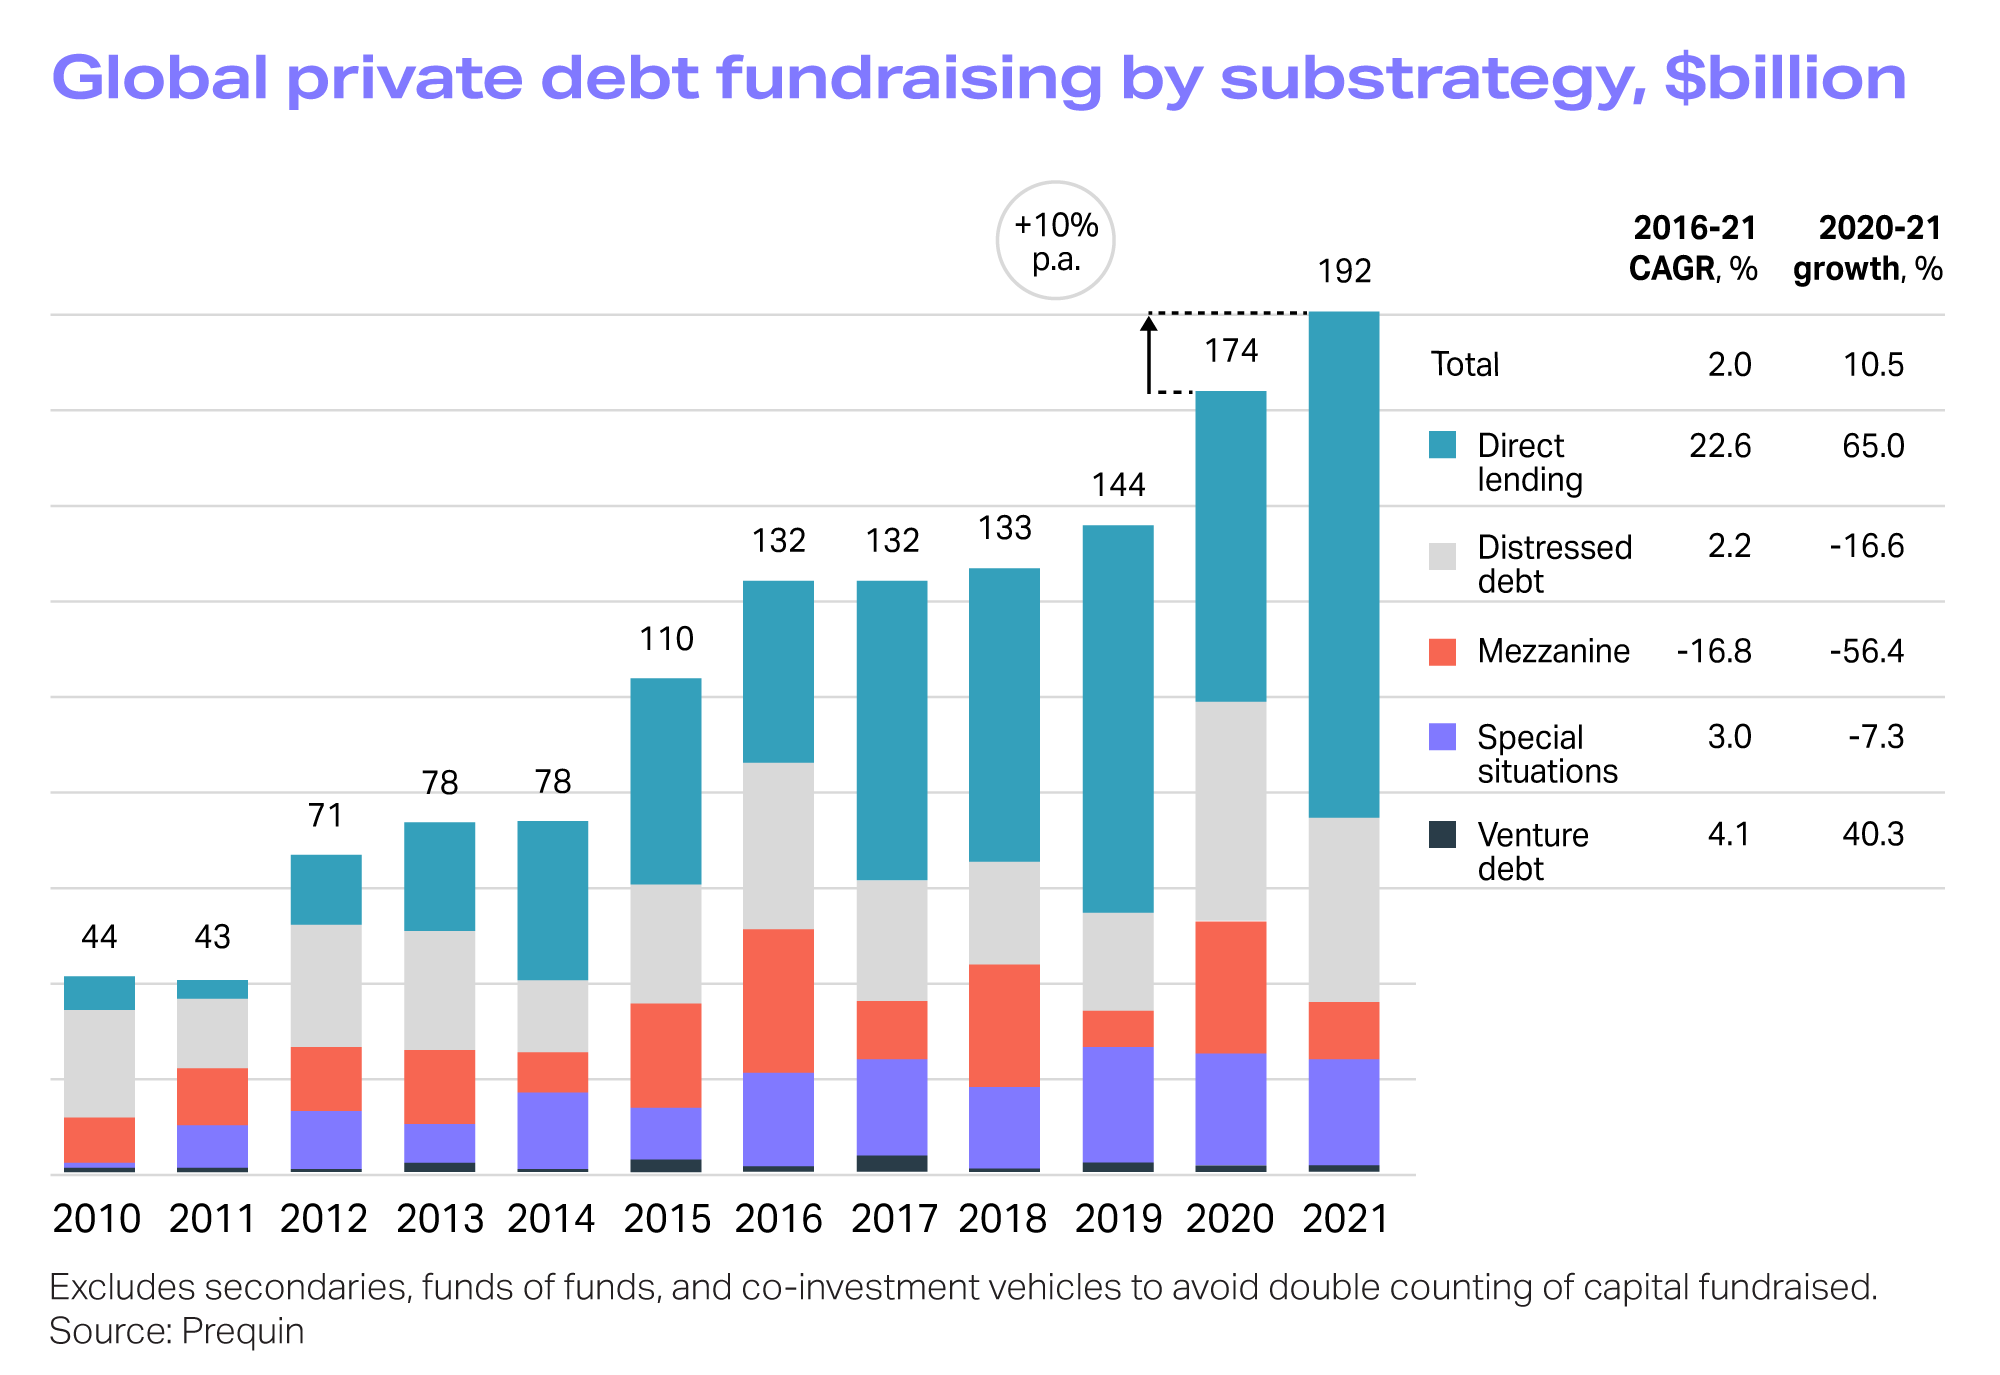 Chart showing global private debt fundraising from 2010 to 2021